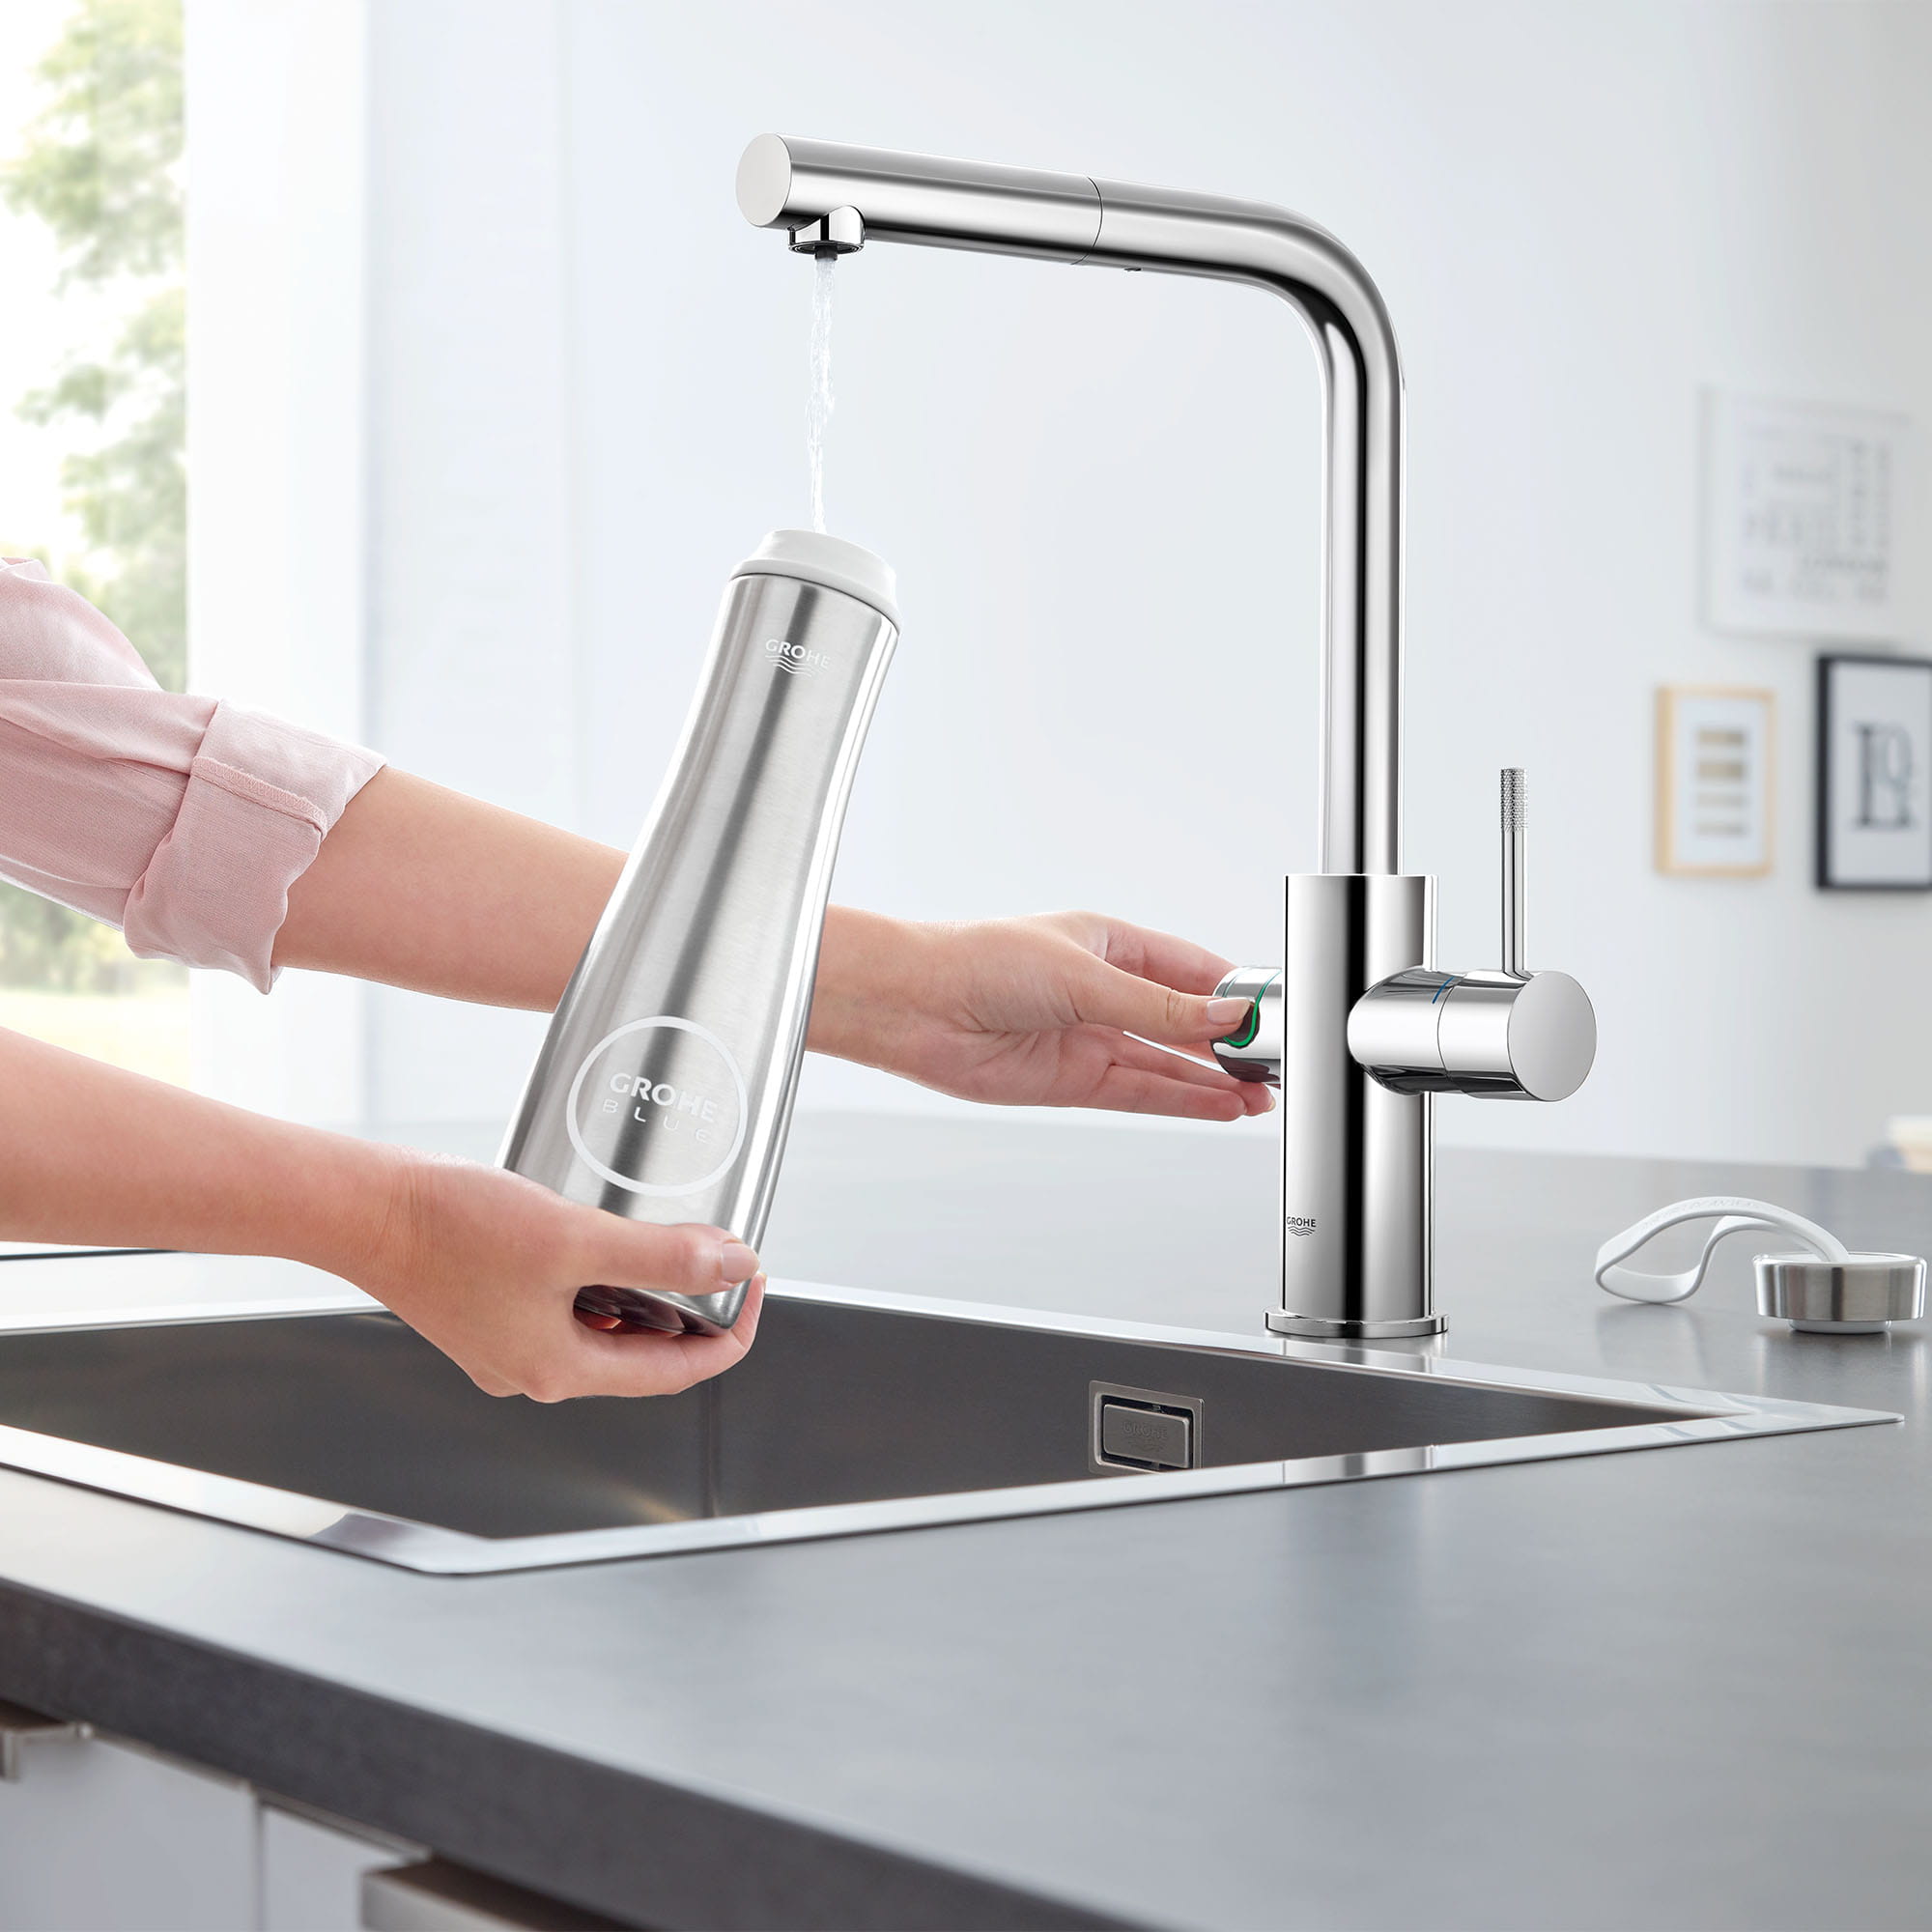 Are Faucet Water Filters Worth It 